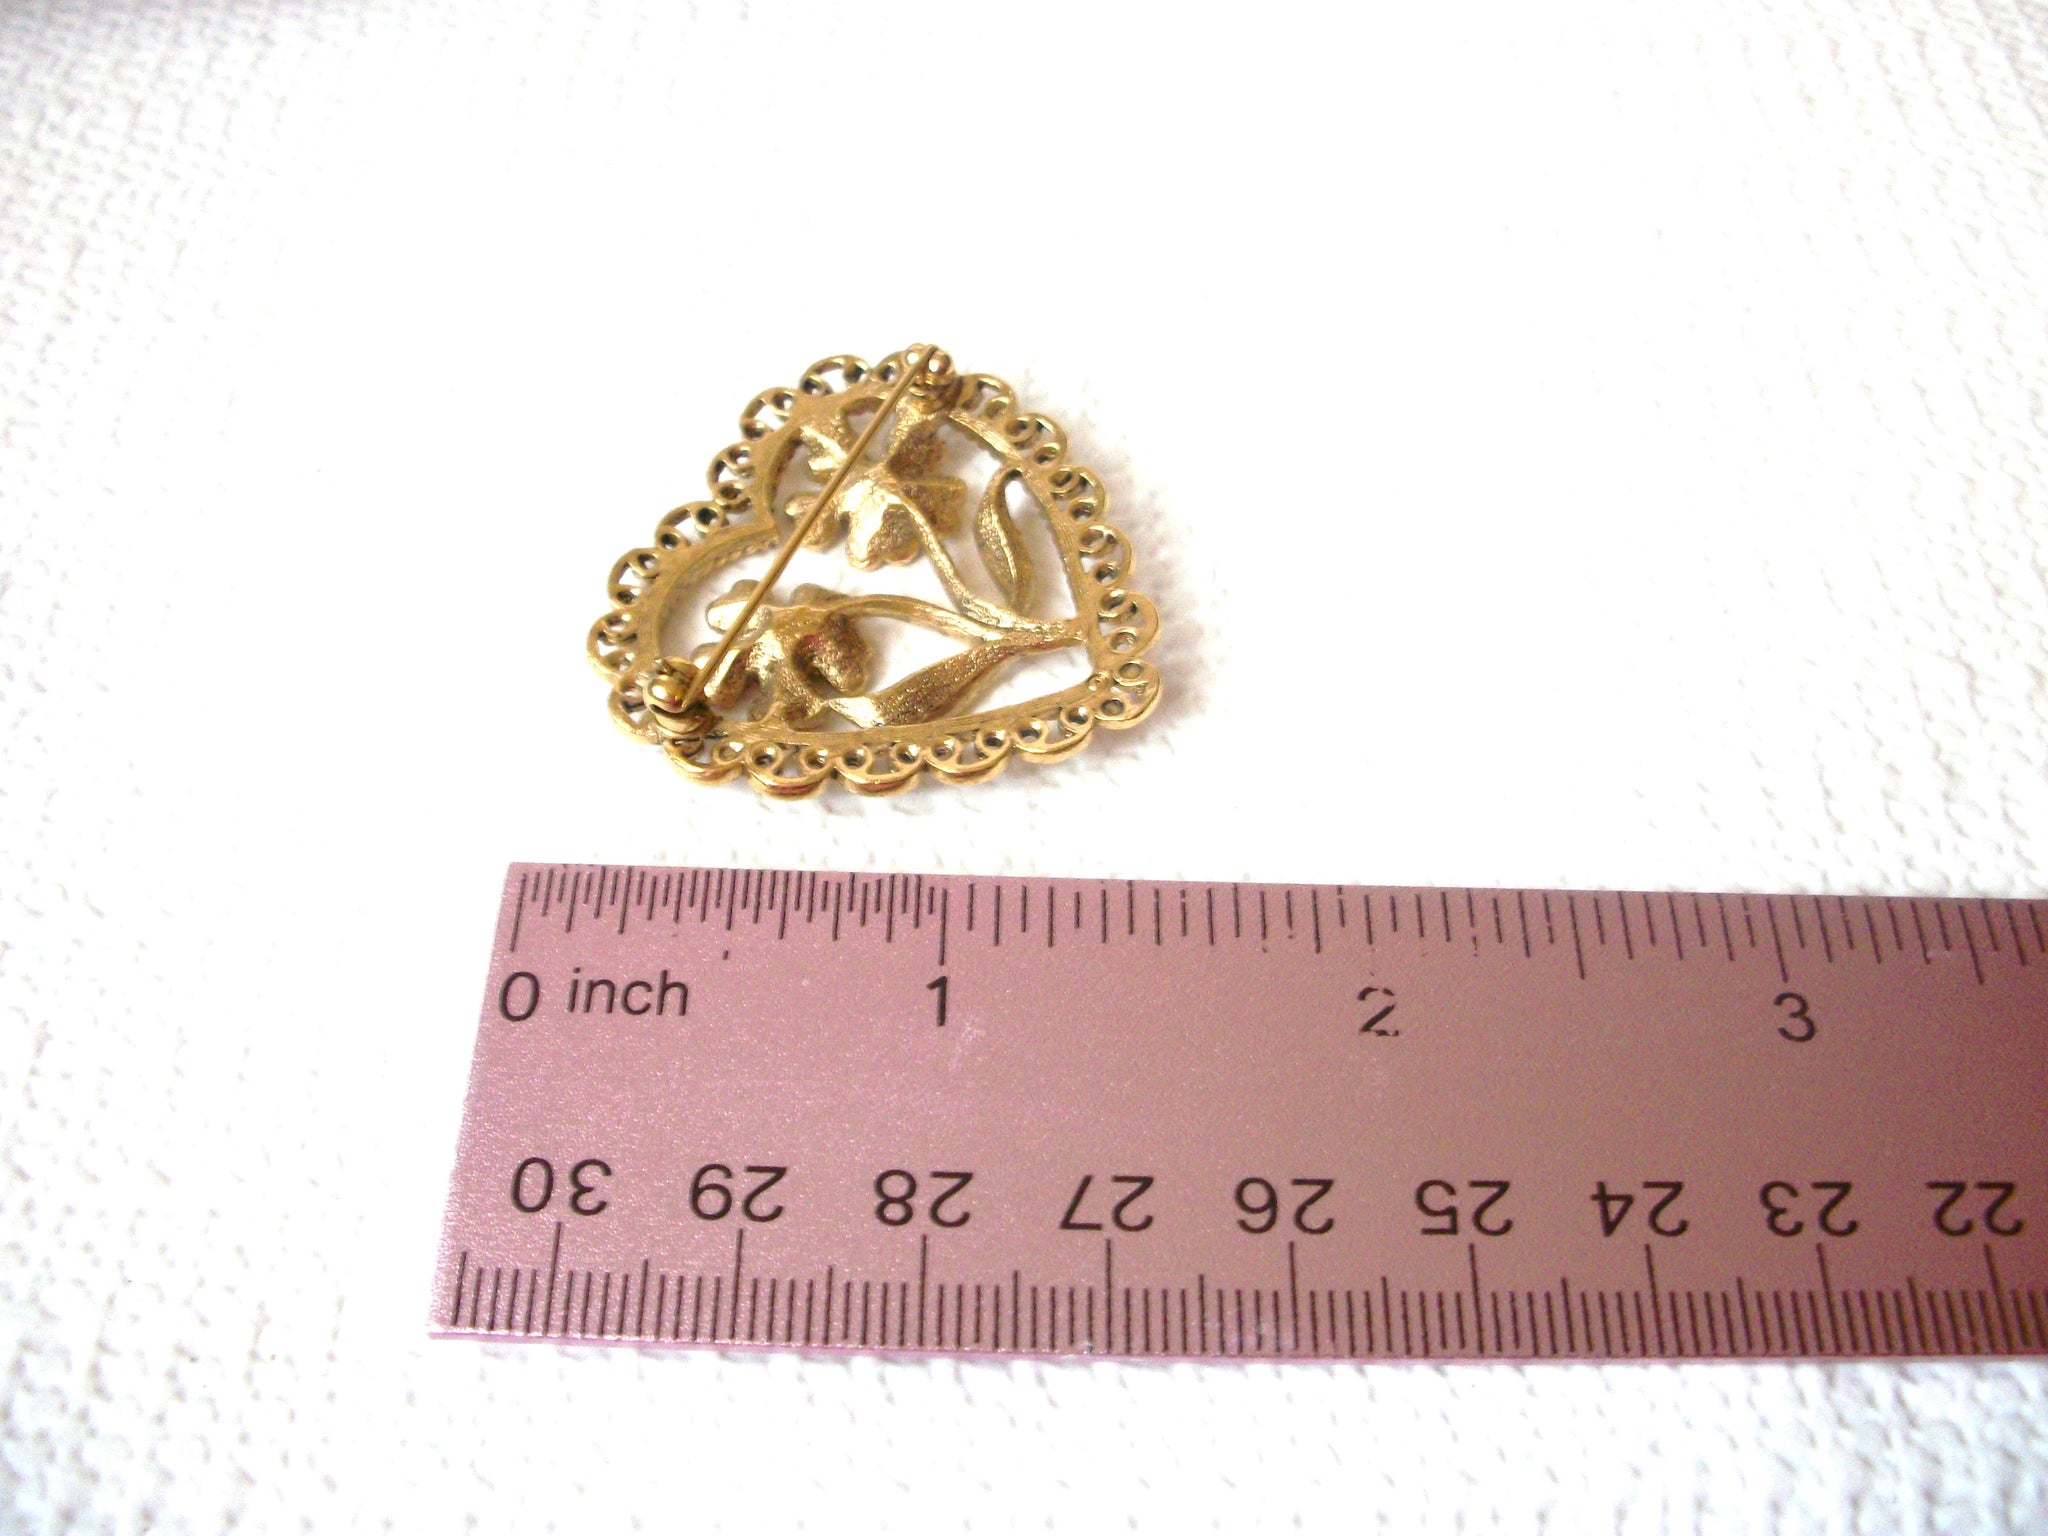 Vintage Damask Gold Toned Brooch, Faux Pearl Heart Brooch Pin 113016